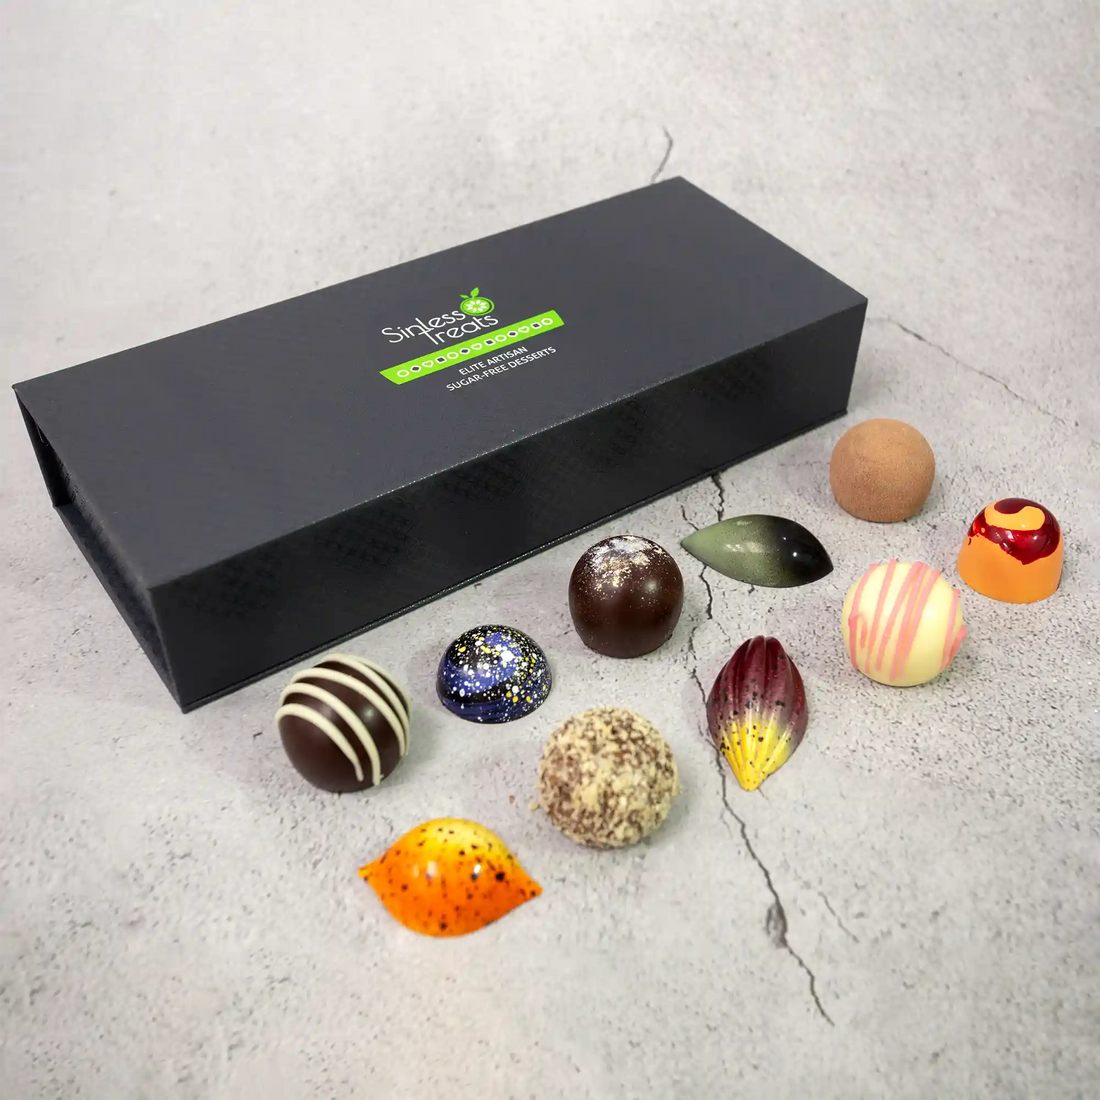 10 creamy and spiced truffles and chocolate bonbons part of Silk Road Luxury Box in front of a closed gift box